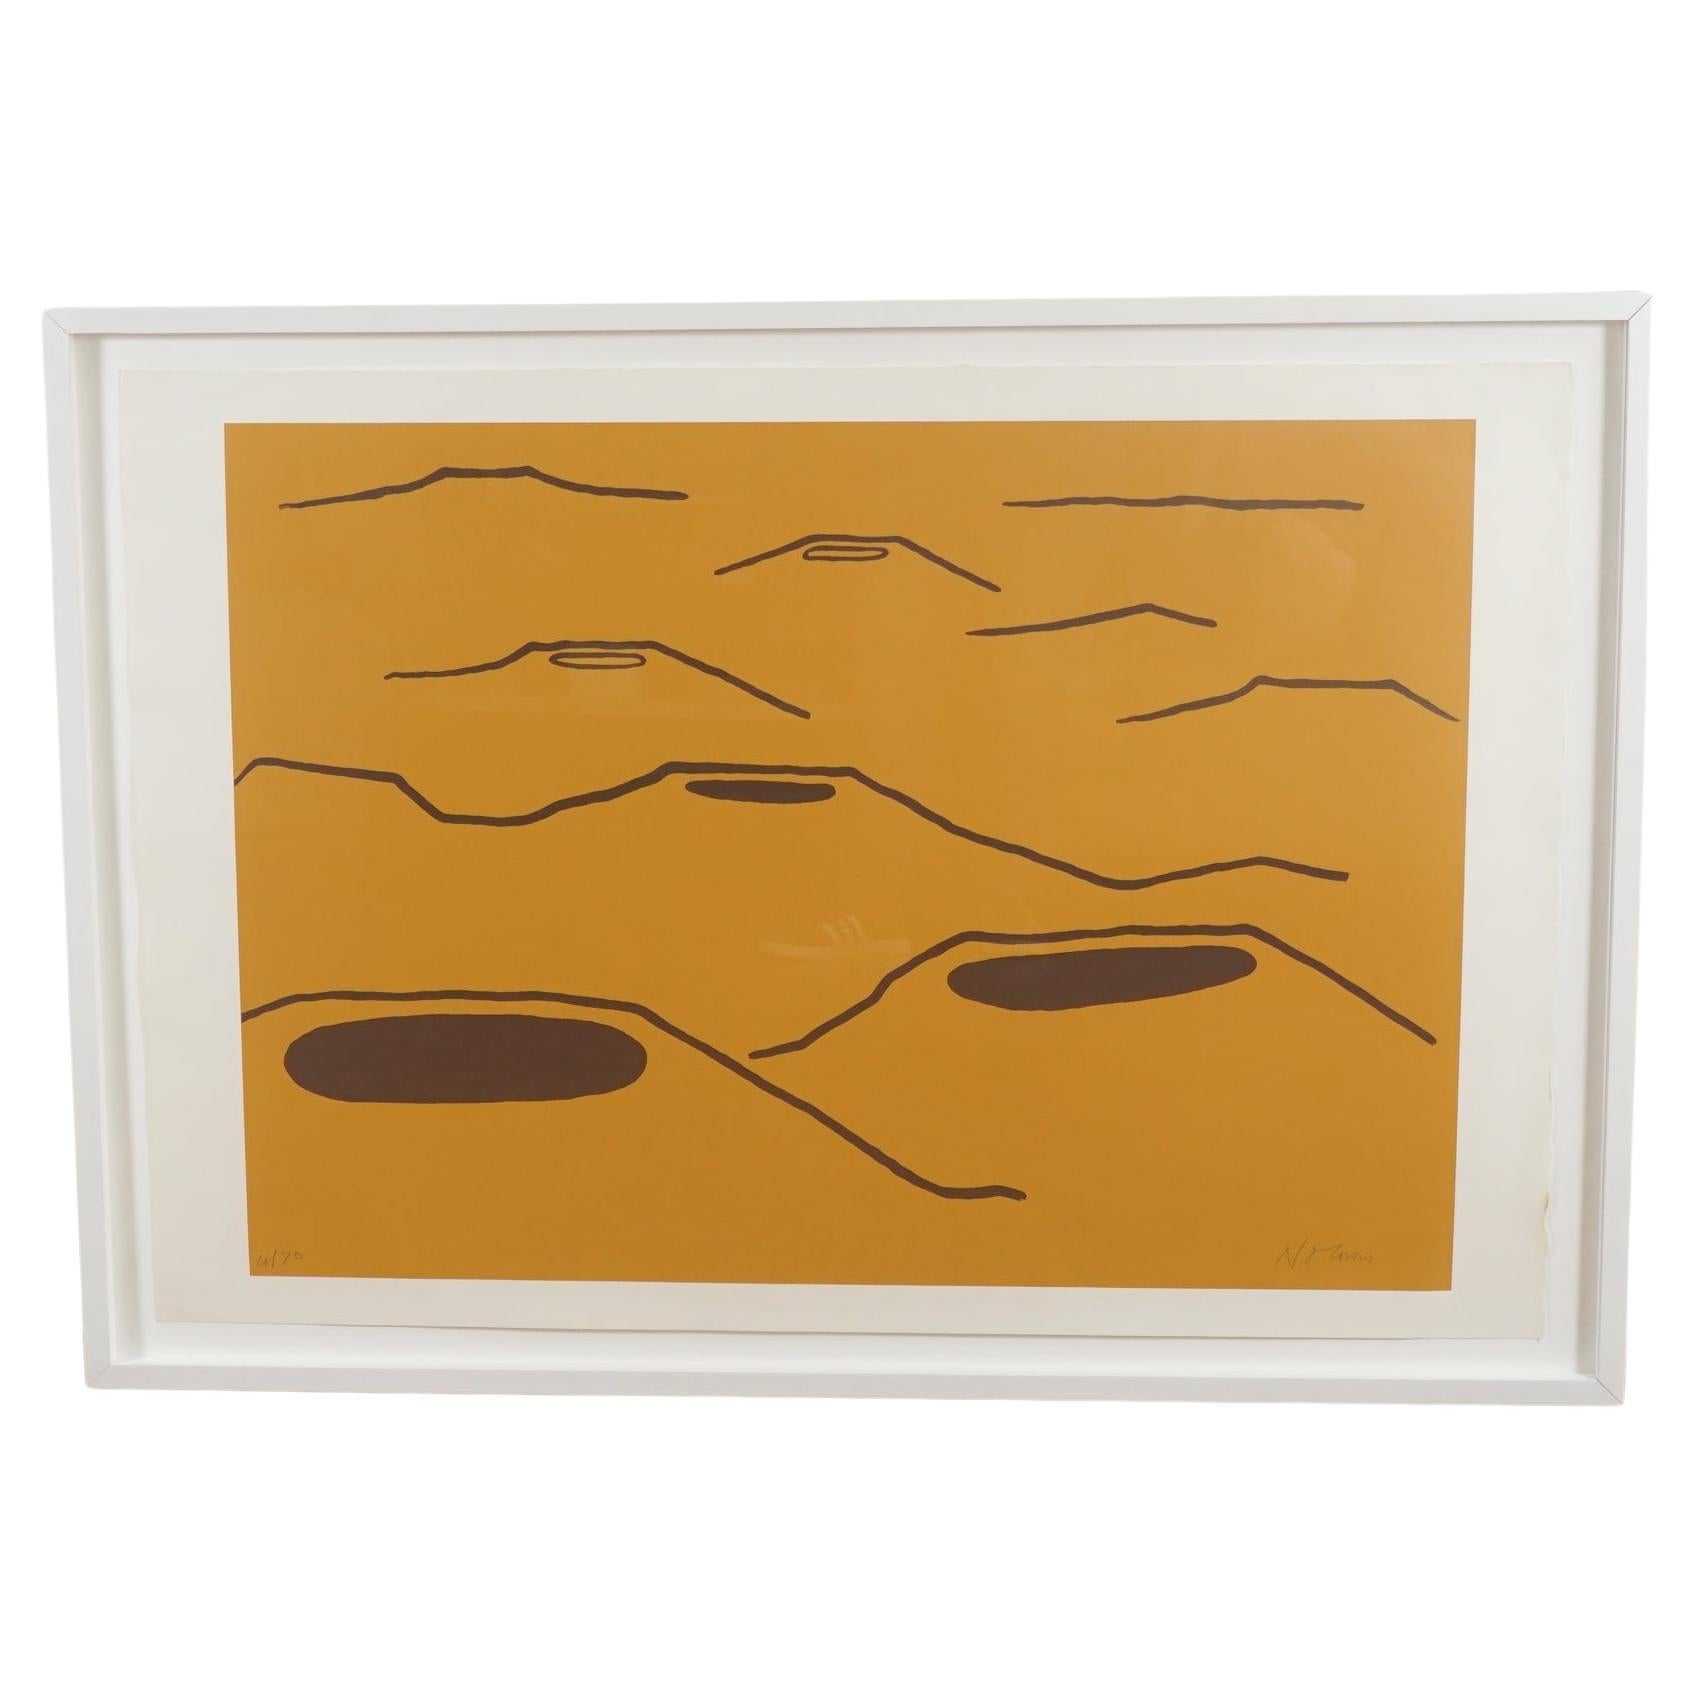 Nicholas Monro, "Craters" Signed Screen Print For Sale